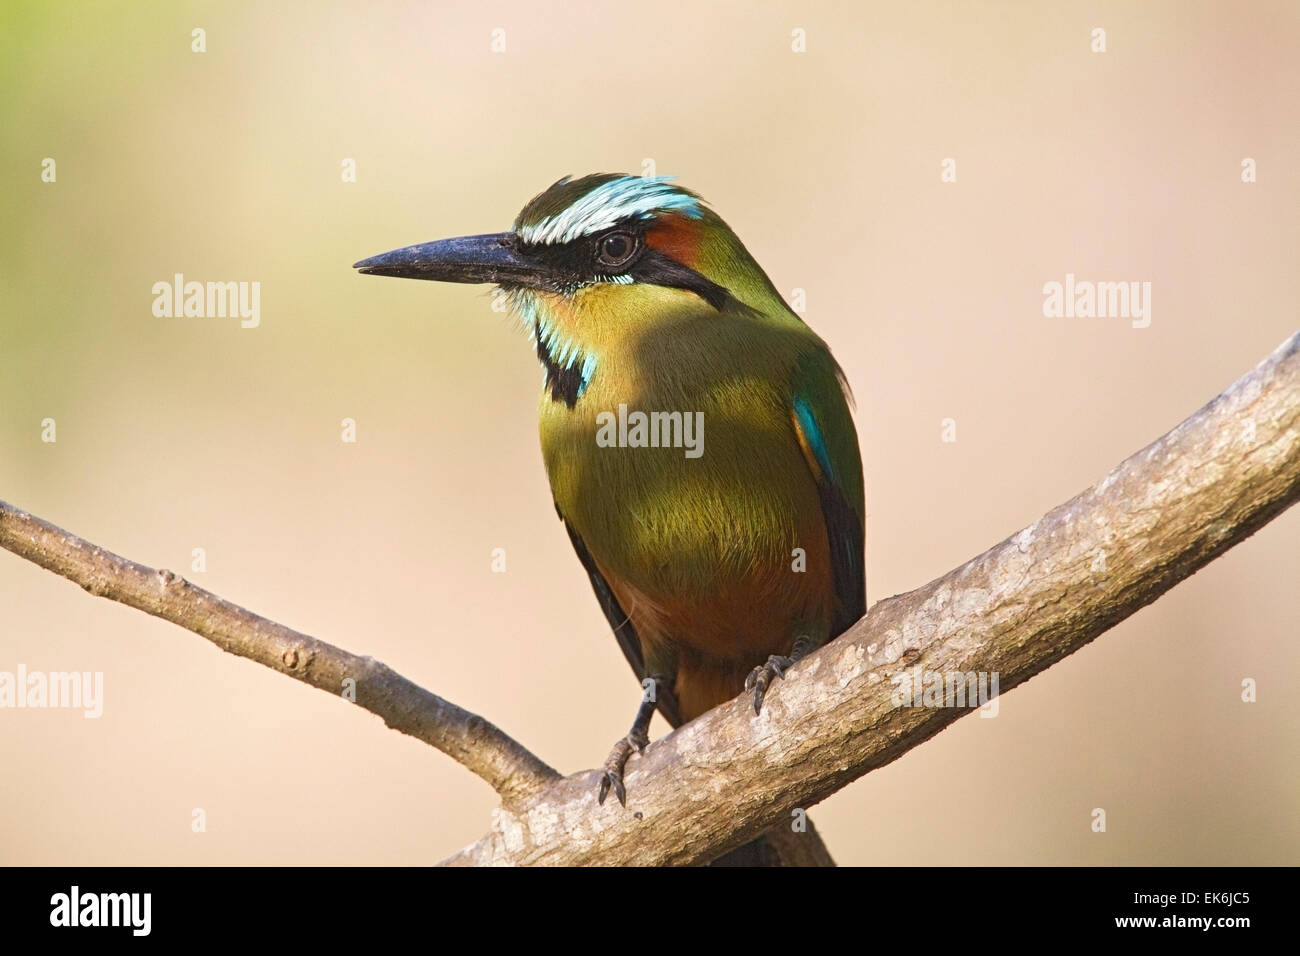 Turquoise-browed Motmot (Eumomota superciliosa) adult perched in tree in rainforest, Costa Rica, central America Stock Photo